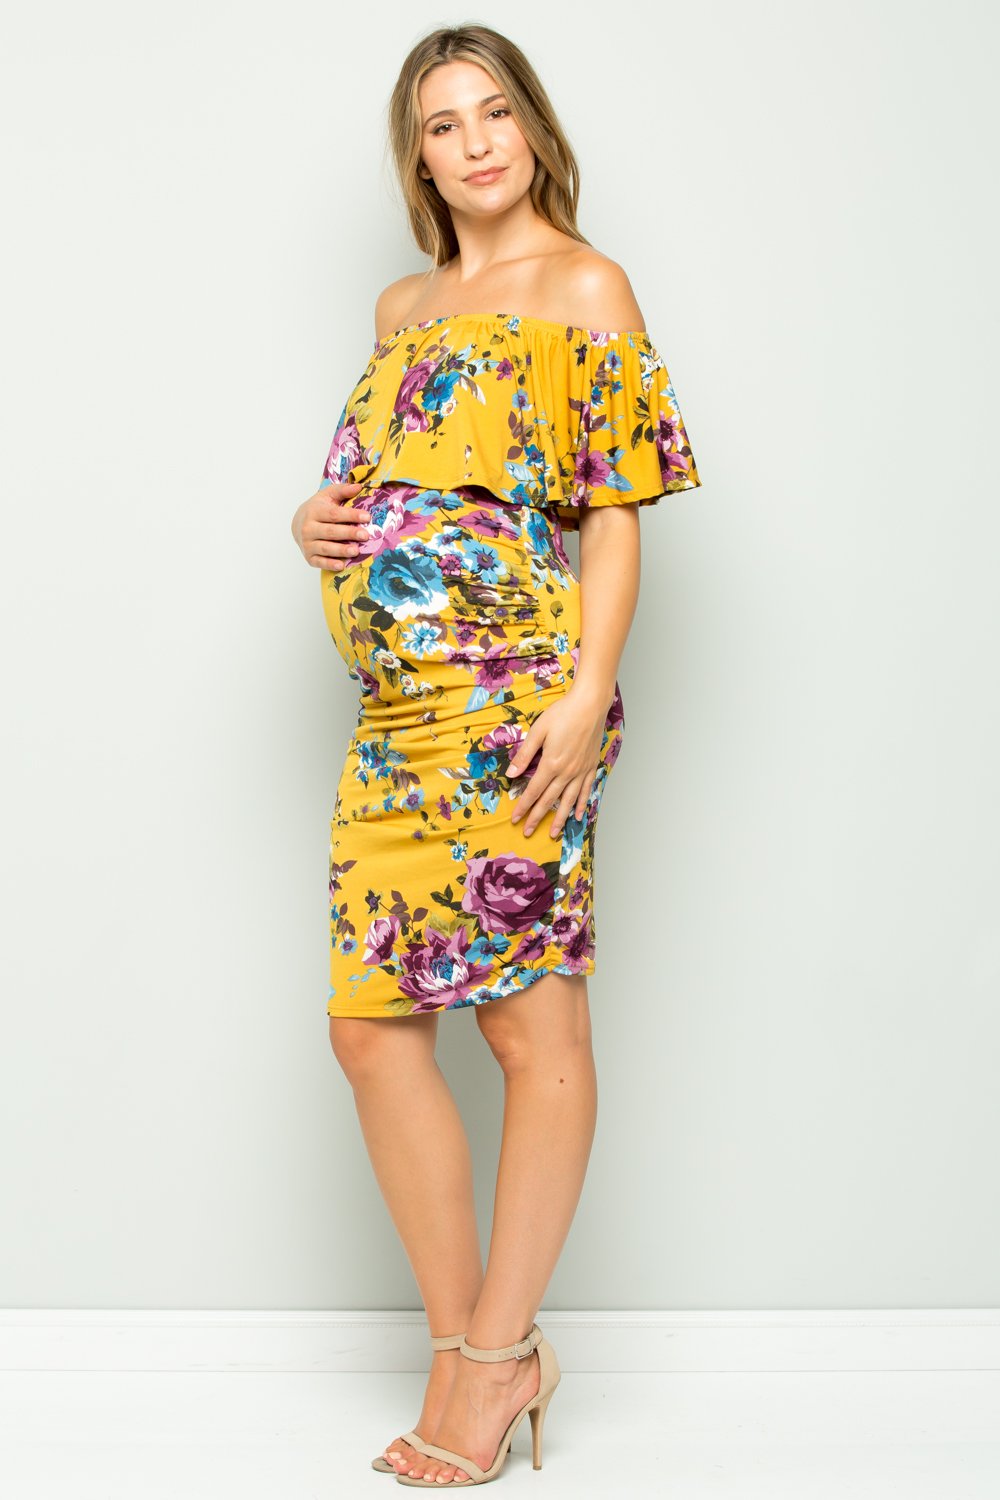 maternity pregnancy baby shower floral off shoulder ruffle neck above knee summer cocktail bodycon dress